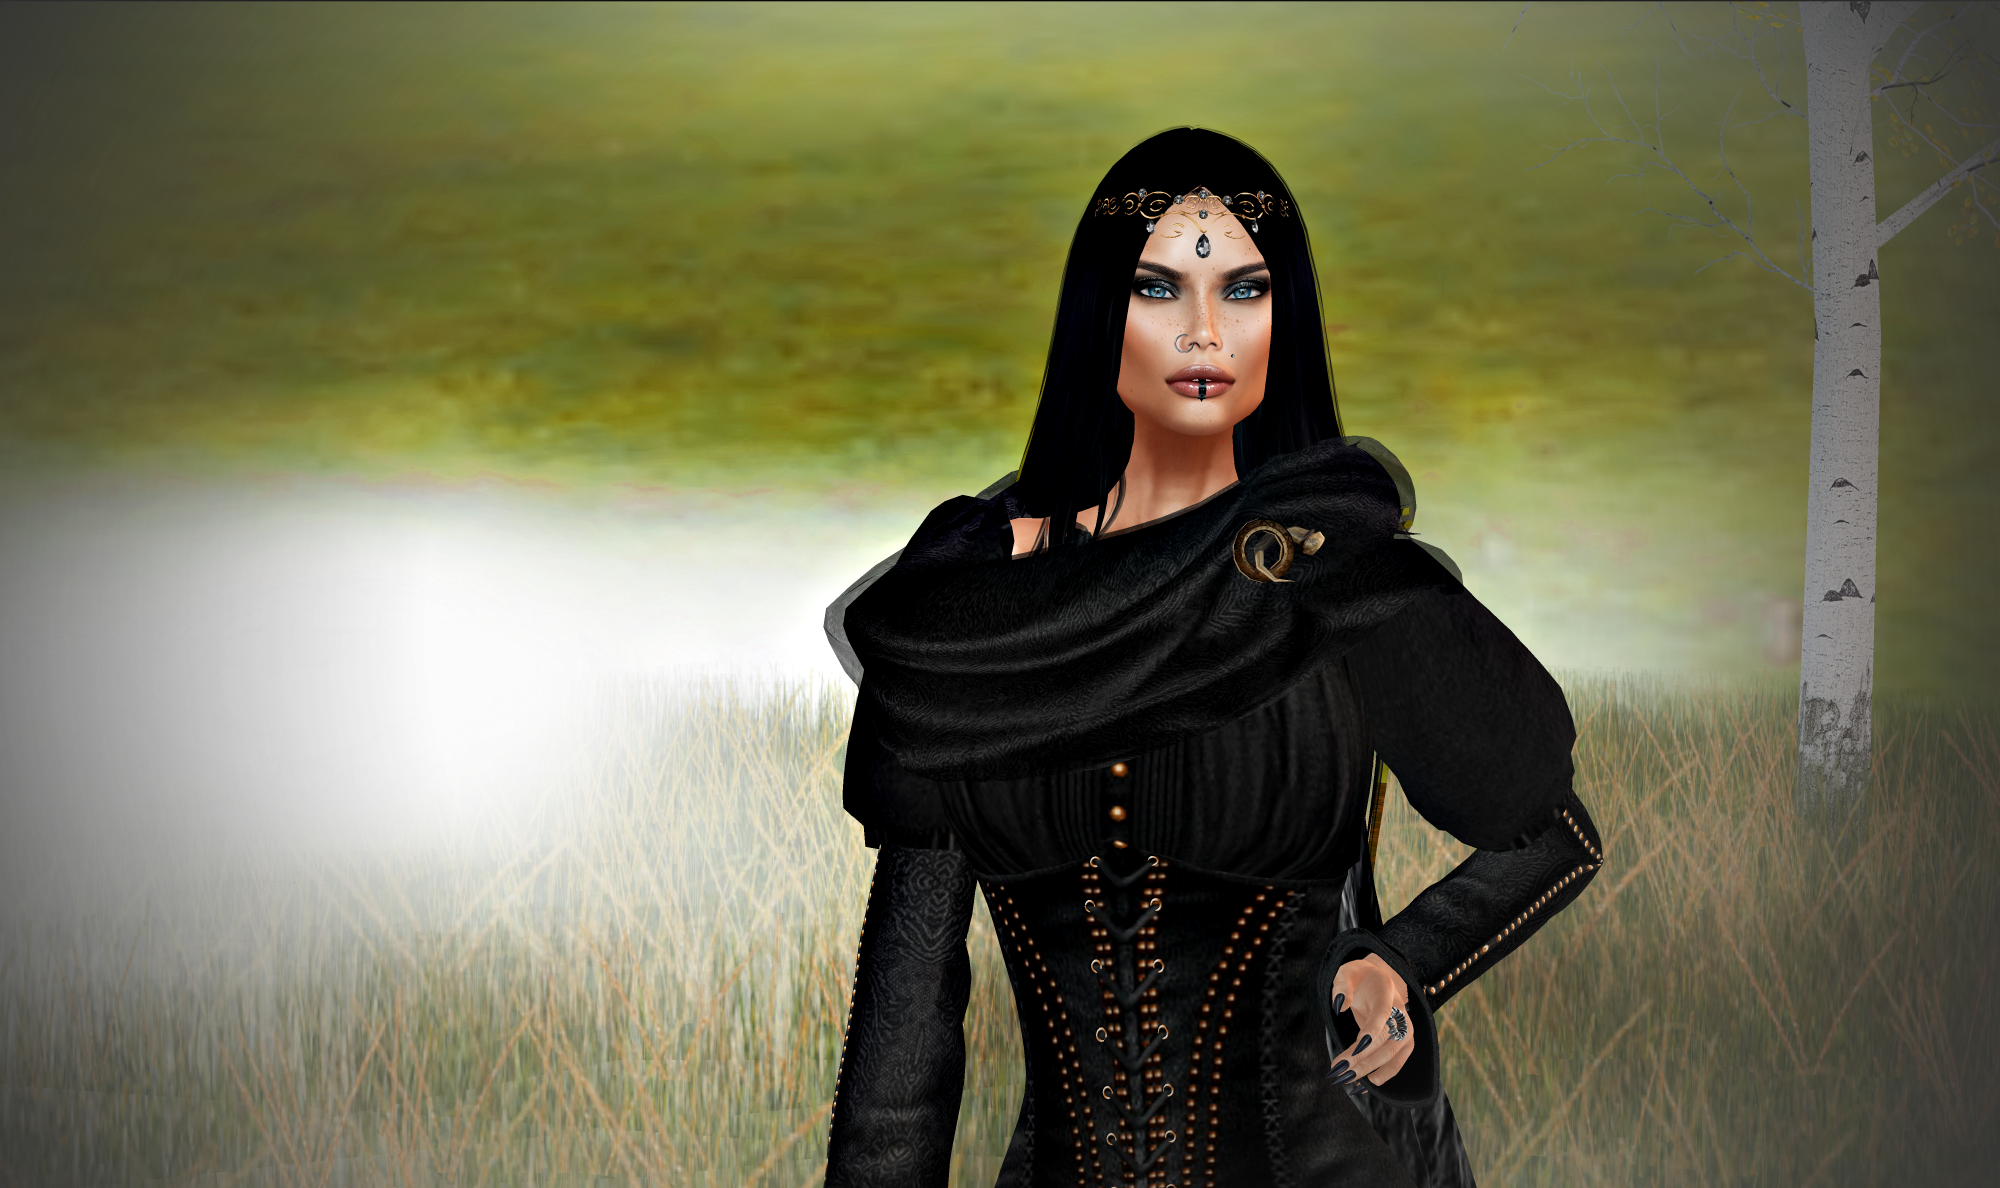 Le Nuvole Cadute in Second Life